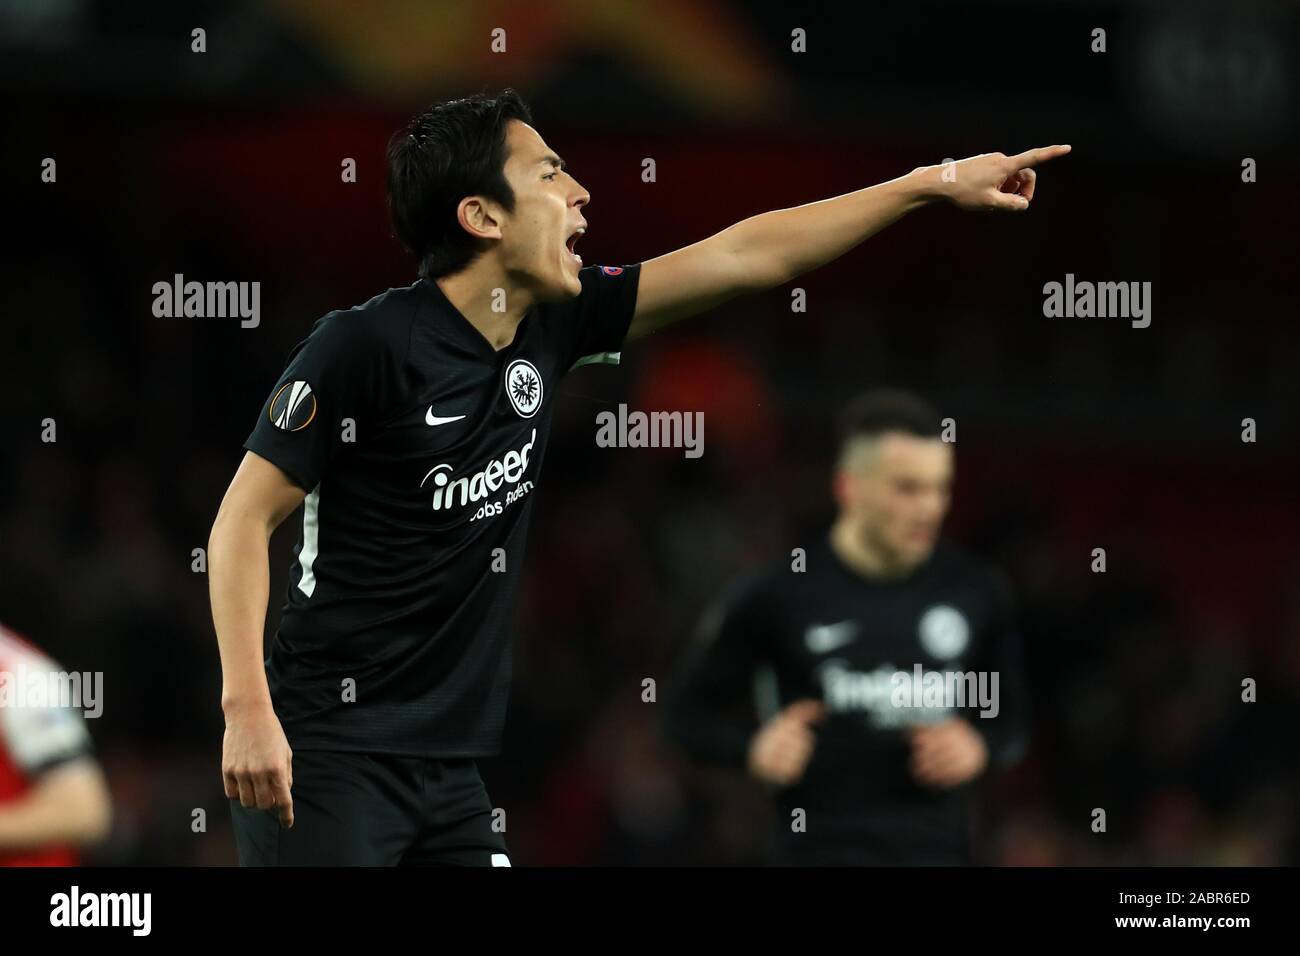 London, UK. 28th November, 2019. Makoto Hasebe of Eintracht Frankfurt during the UEFA Europa League match between Arsenal and Eintracht Frankfurt at the Emirates Stadium, London on Thursday 28th November 2019. (Credit: Leila Coker | MI News) Photograph may only be used for newspaper and/or magazine editorial purposes, license required for commercial use Credit: MI News & Sport /Alamy Live News Stock Photo